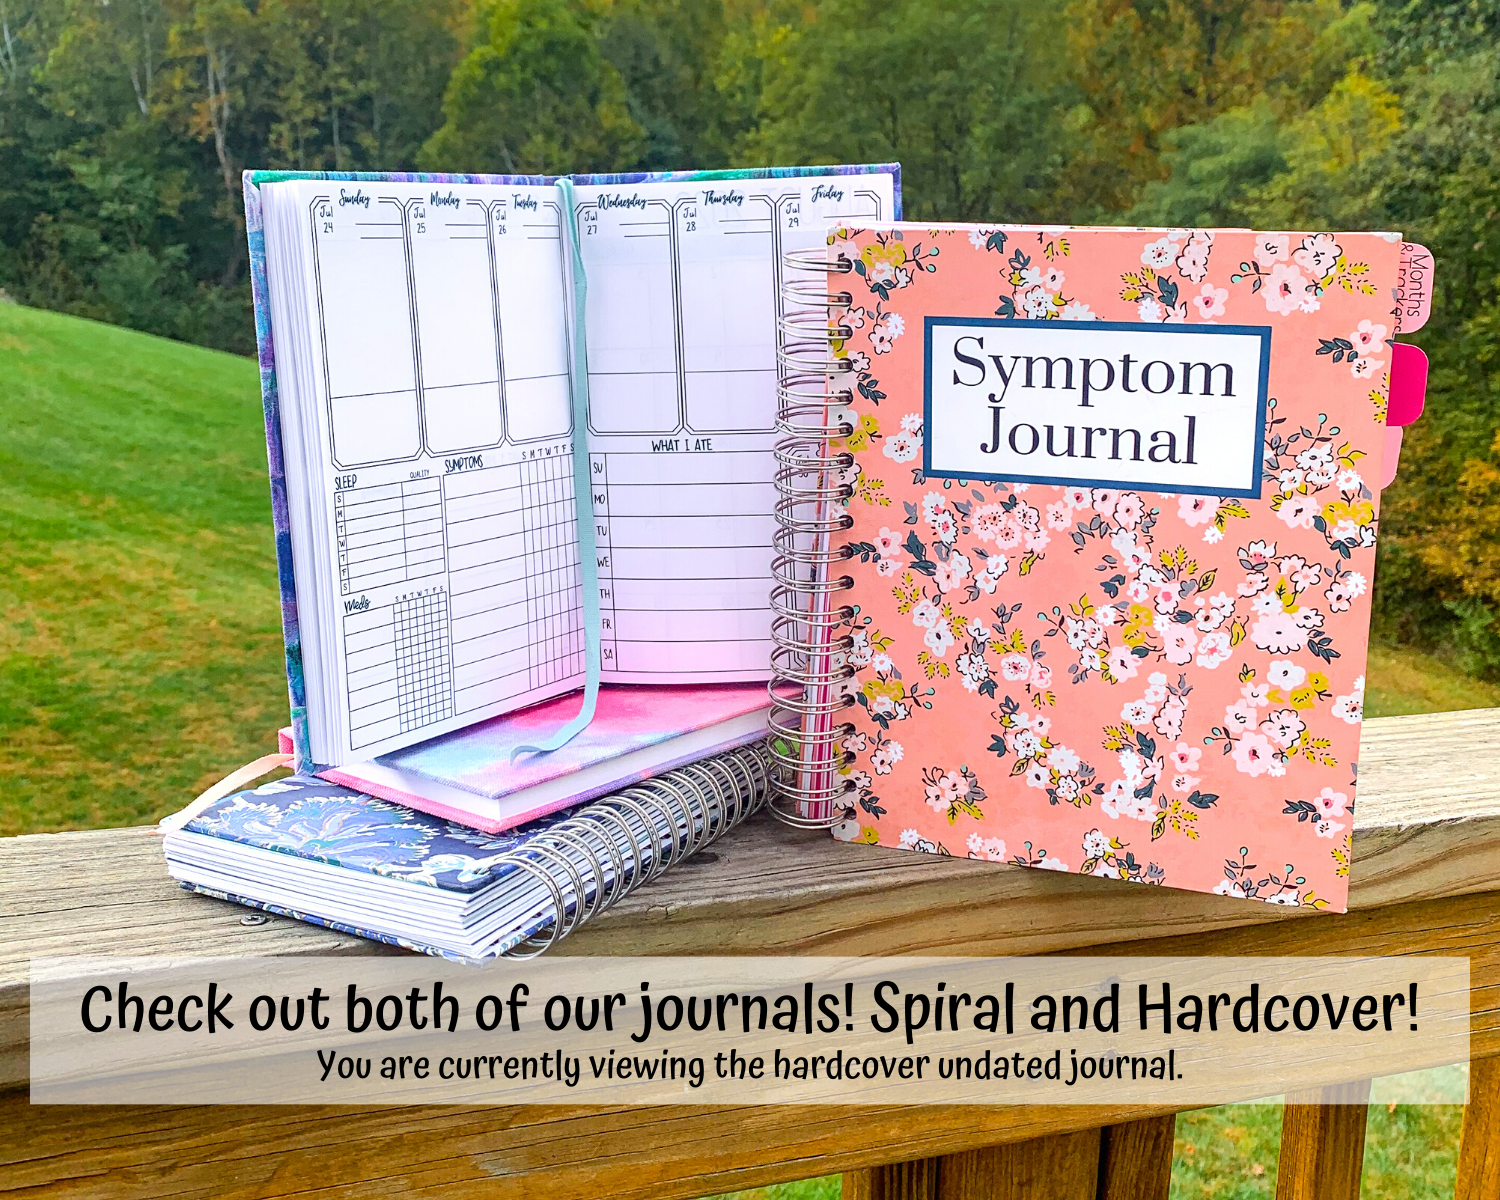 One of the journals shown is sitting on top of another hardcover book in pink, and a blue spiral bound book. A large pink spiral bound book is shown closed to it's right with a label that says Symptom Journal. A note says check out both of our journals Spiral and Hardcover. You are currently viewing the hardcover style.